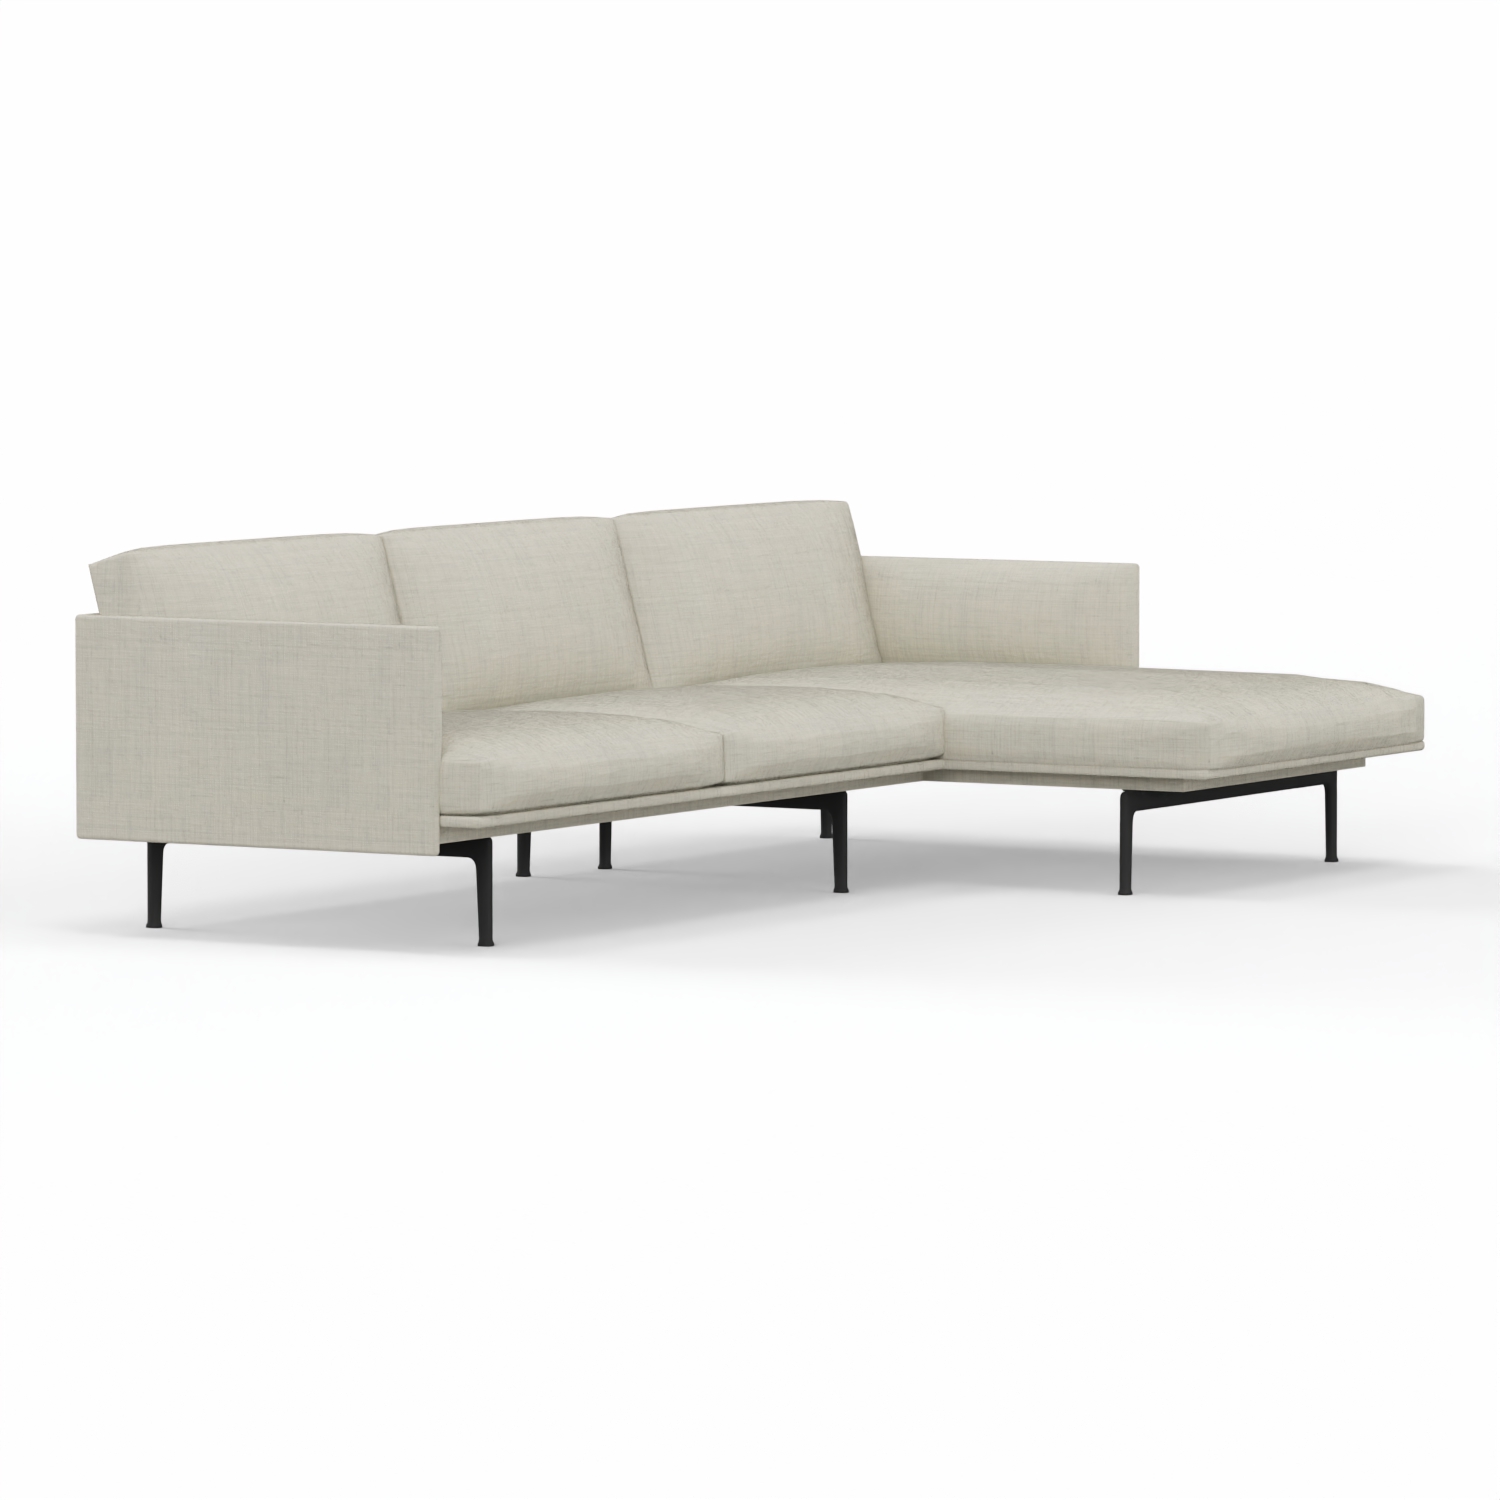 Outline Sofa / Chaise Longue / Right 27672-113